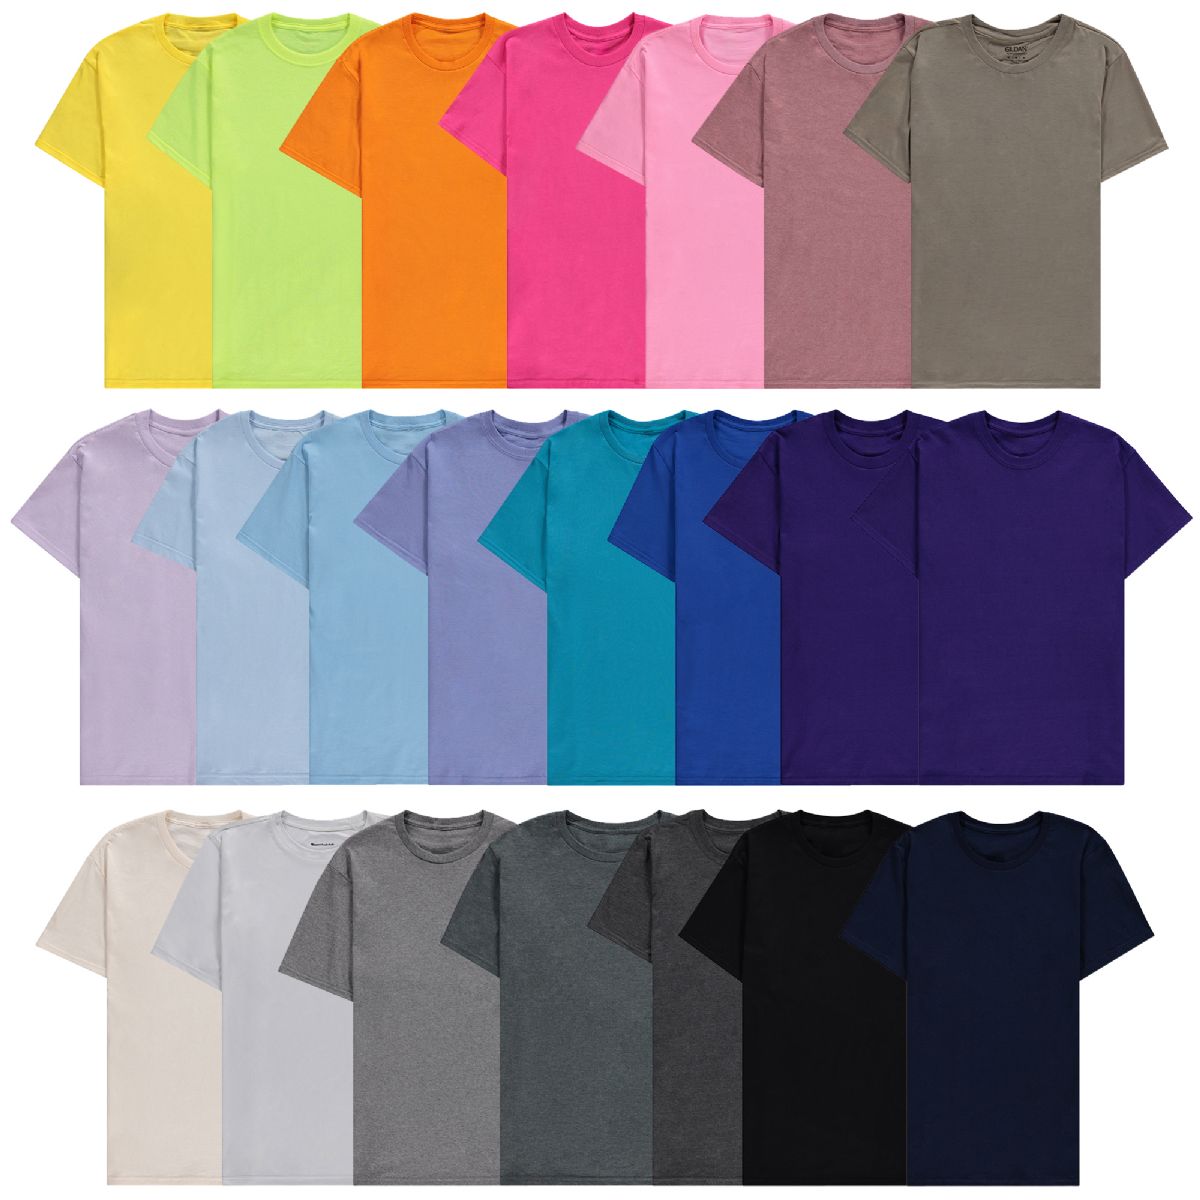 72 Pieces of Mens King Size Cotton Crew Neck Short Sleeve T-Shirts Irregular , Assorted Colors And Sizes 2345x